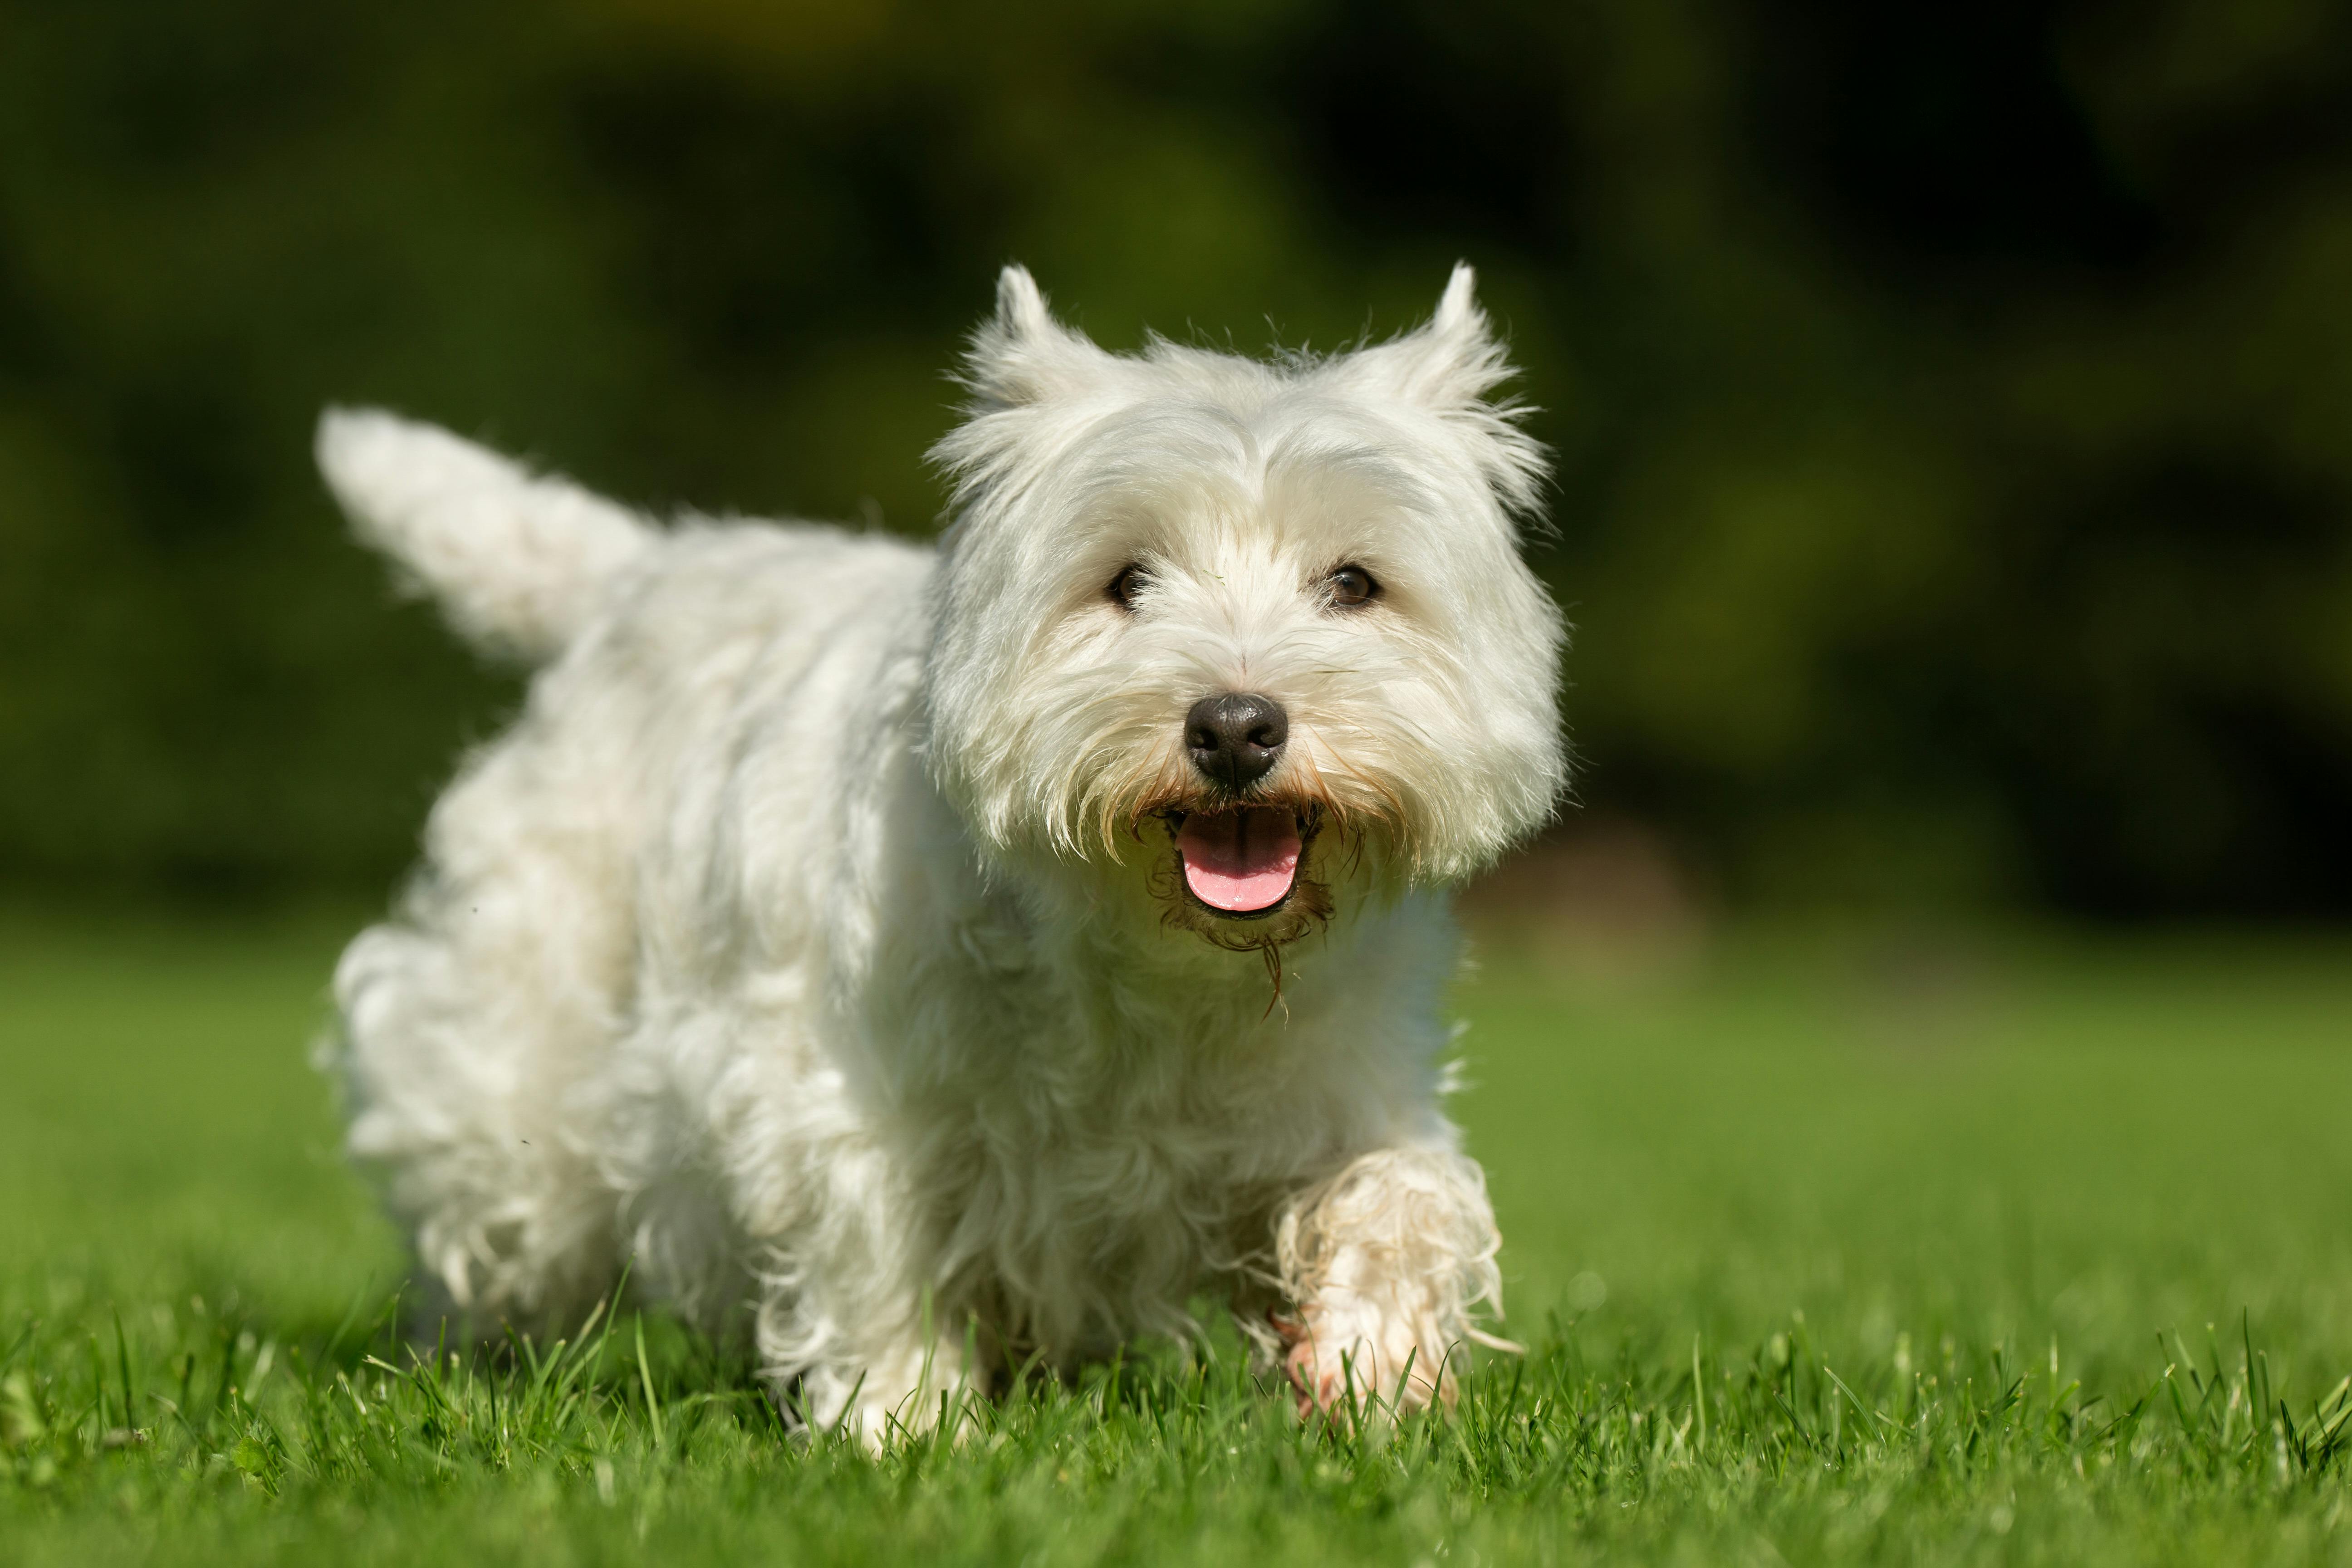 Purébred adult West Highland White Terrier dog on grass in the garden on a sunny day.